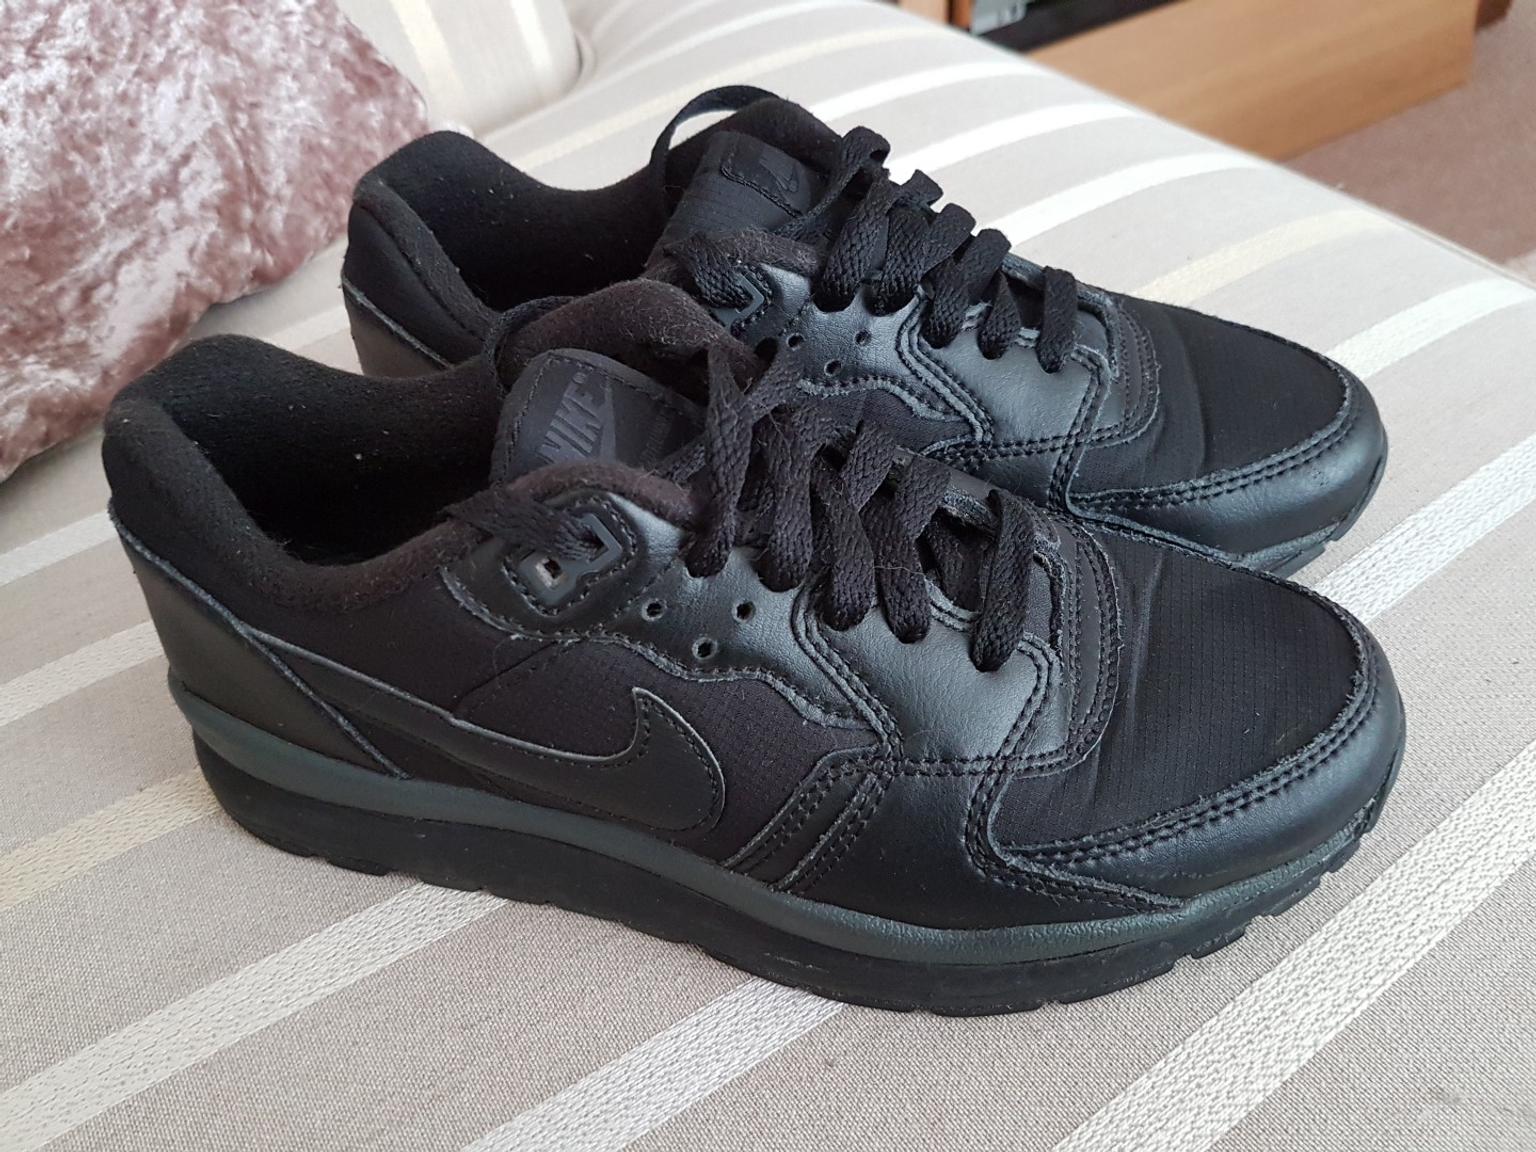 black size 4 trainers